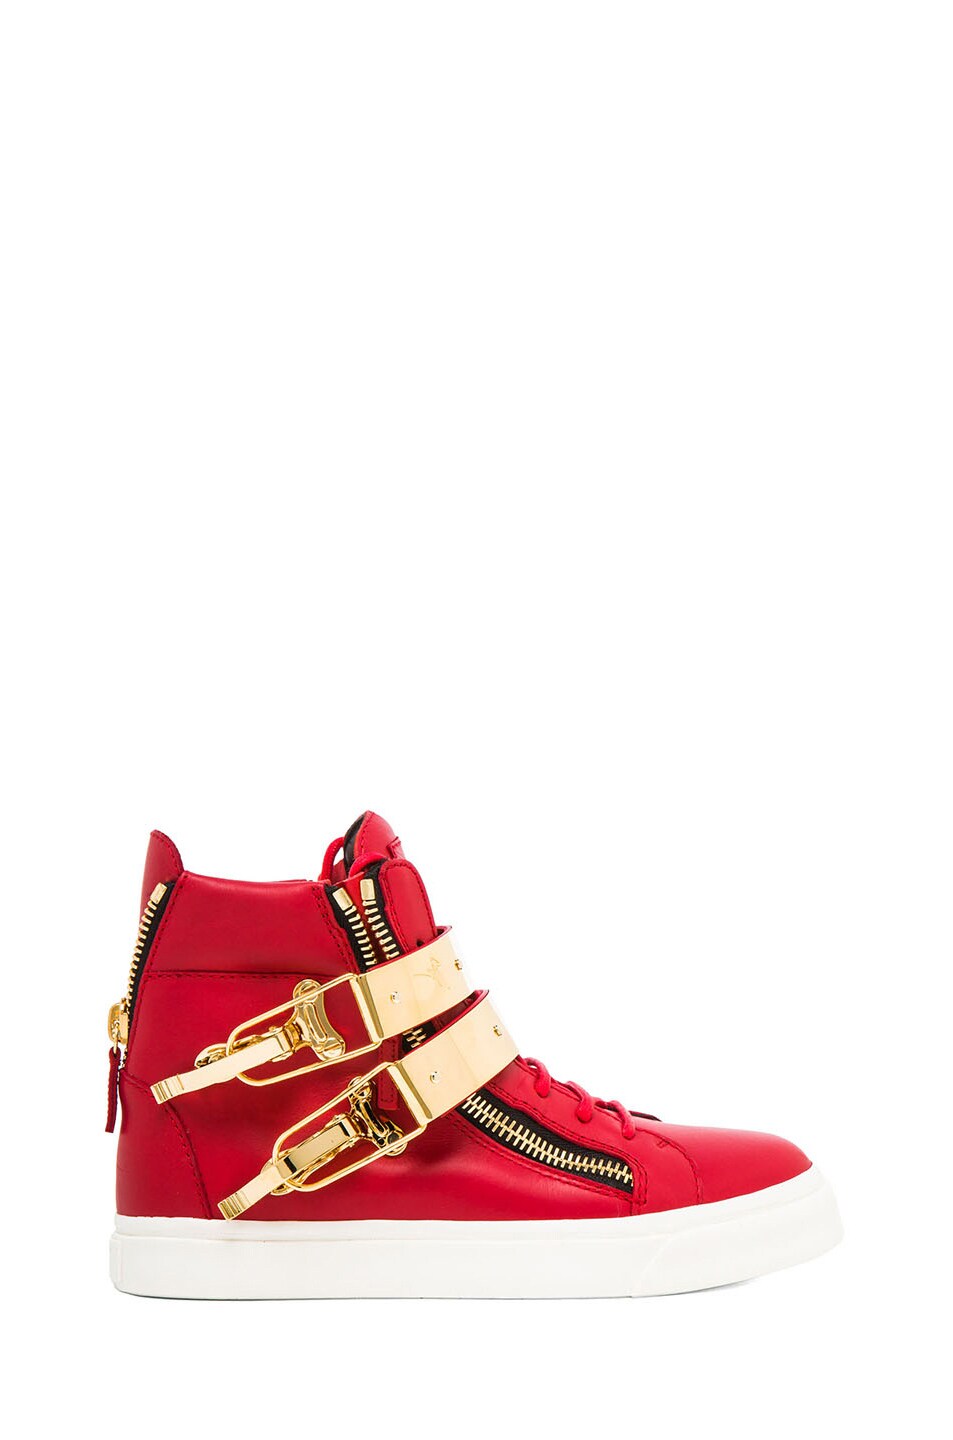 Image 1 of Giuseppe Zanotti Buckled London Leather Sneakers in Flame